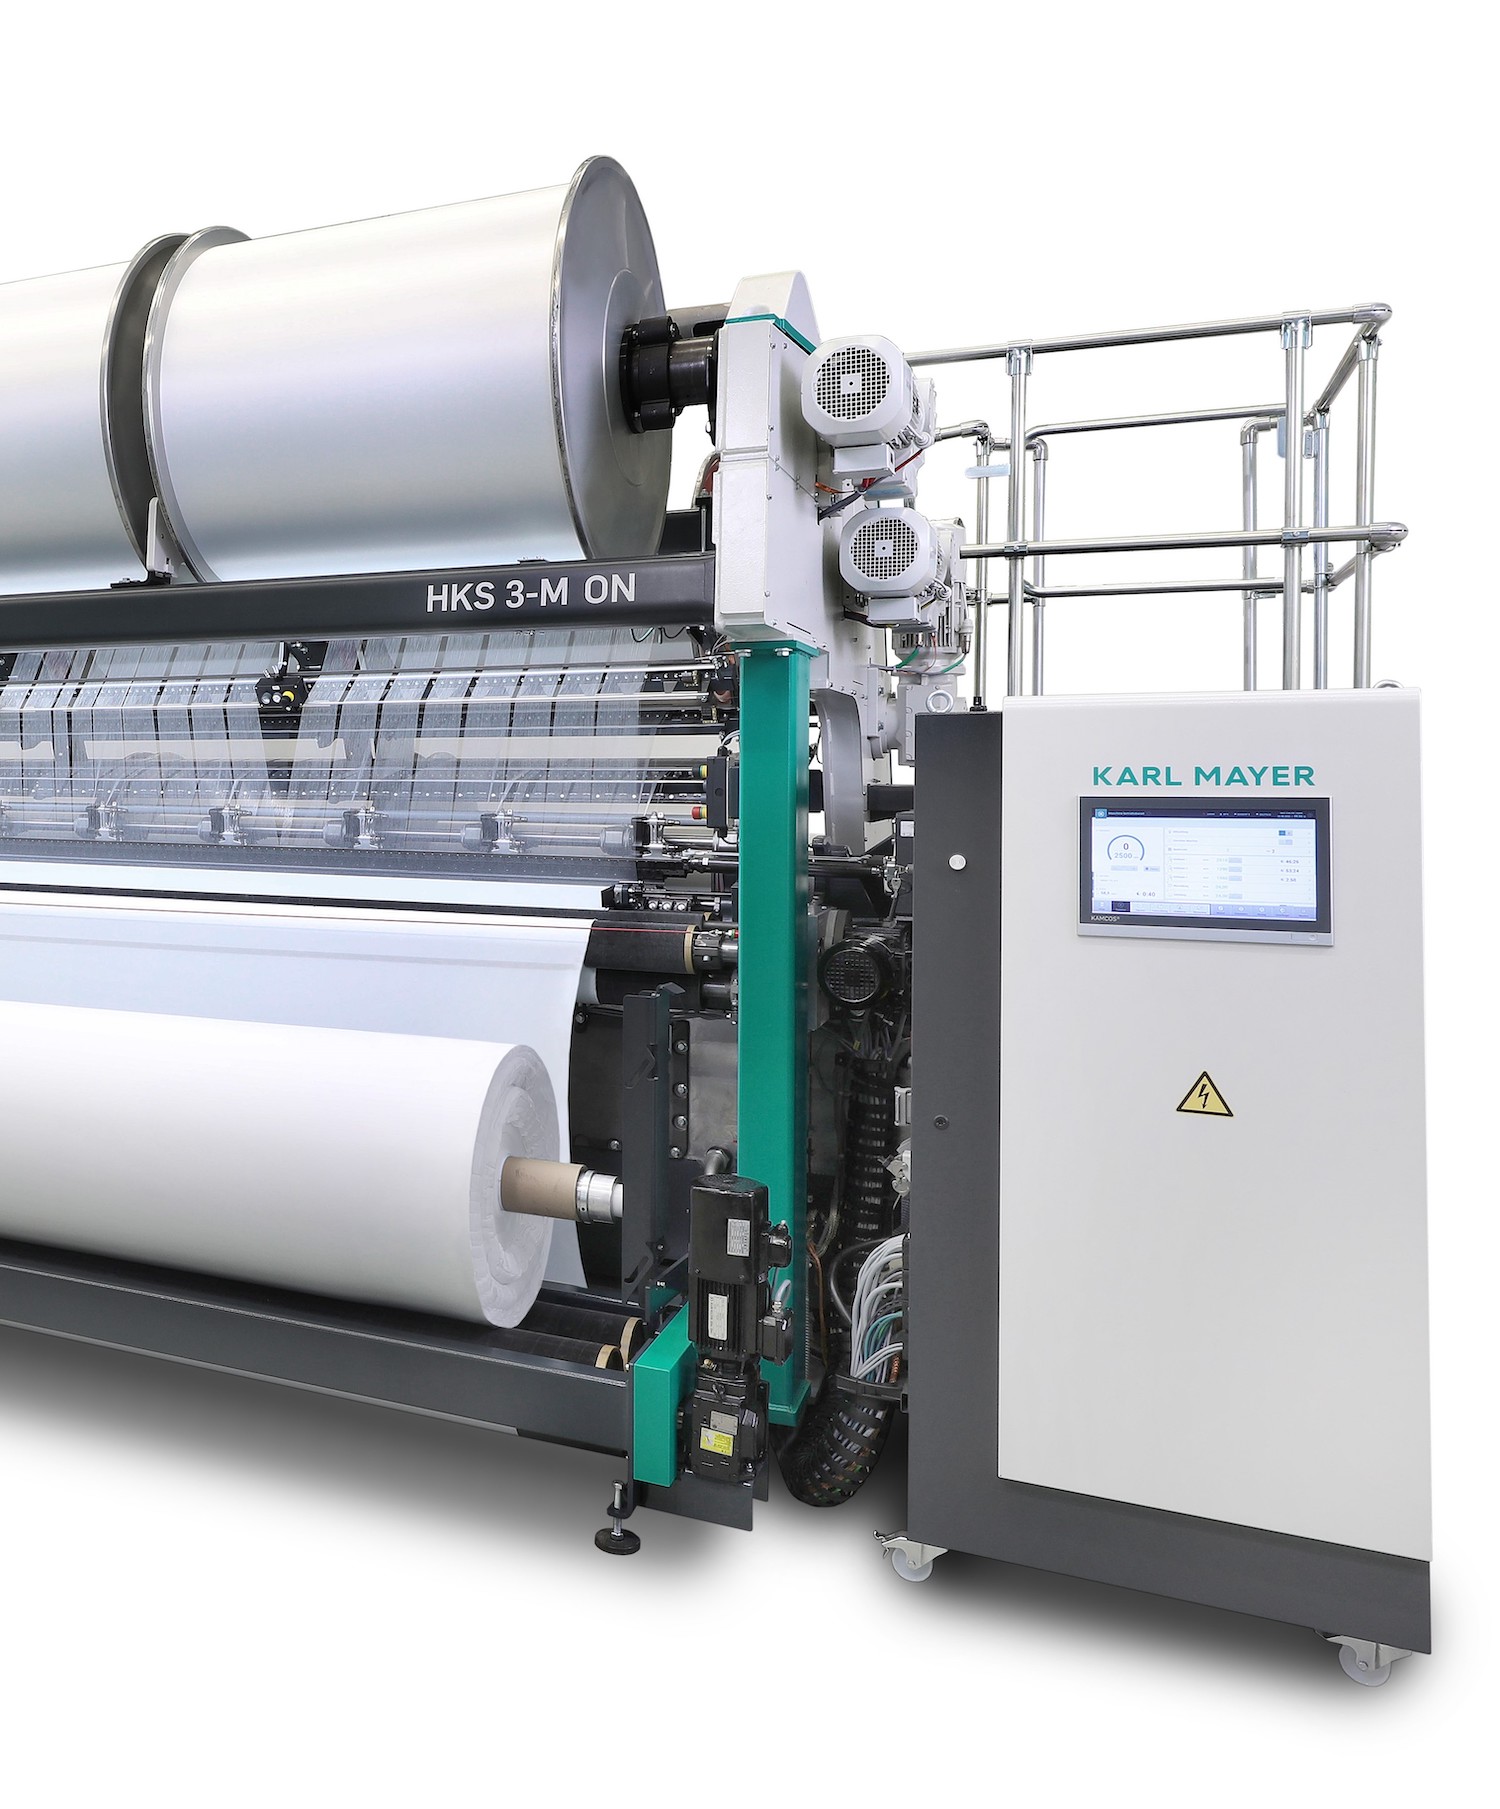 High-performance warp knitting machine with energy-efficient direct drive. © Karl Mayer